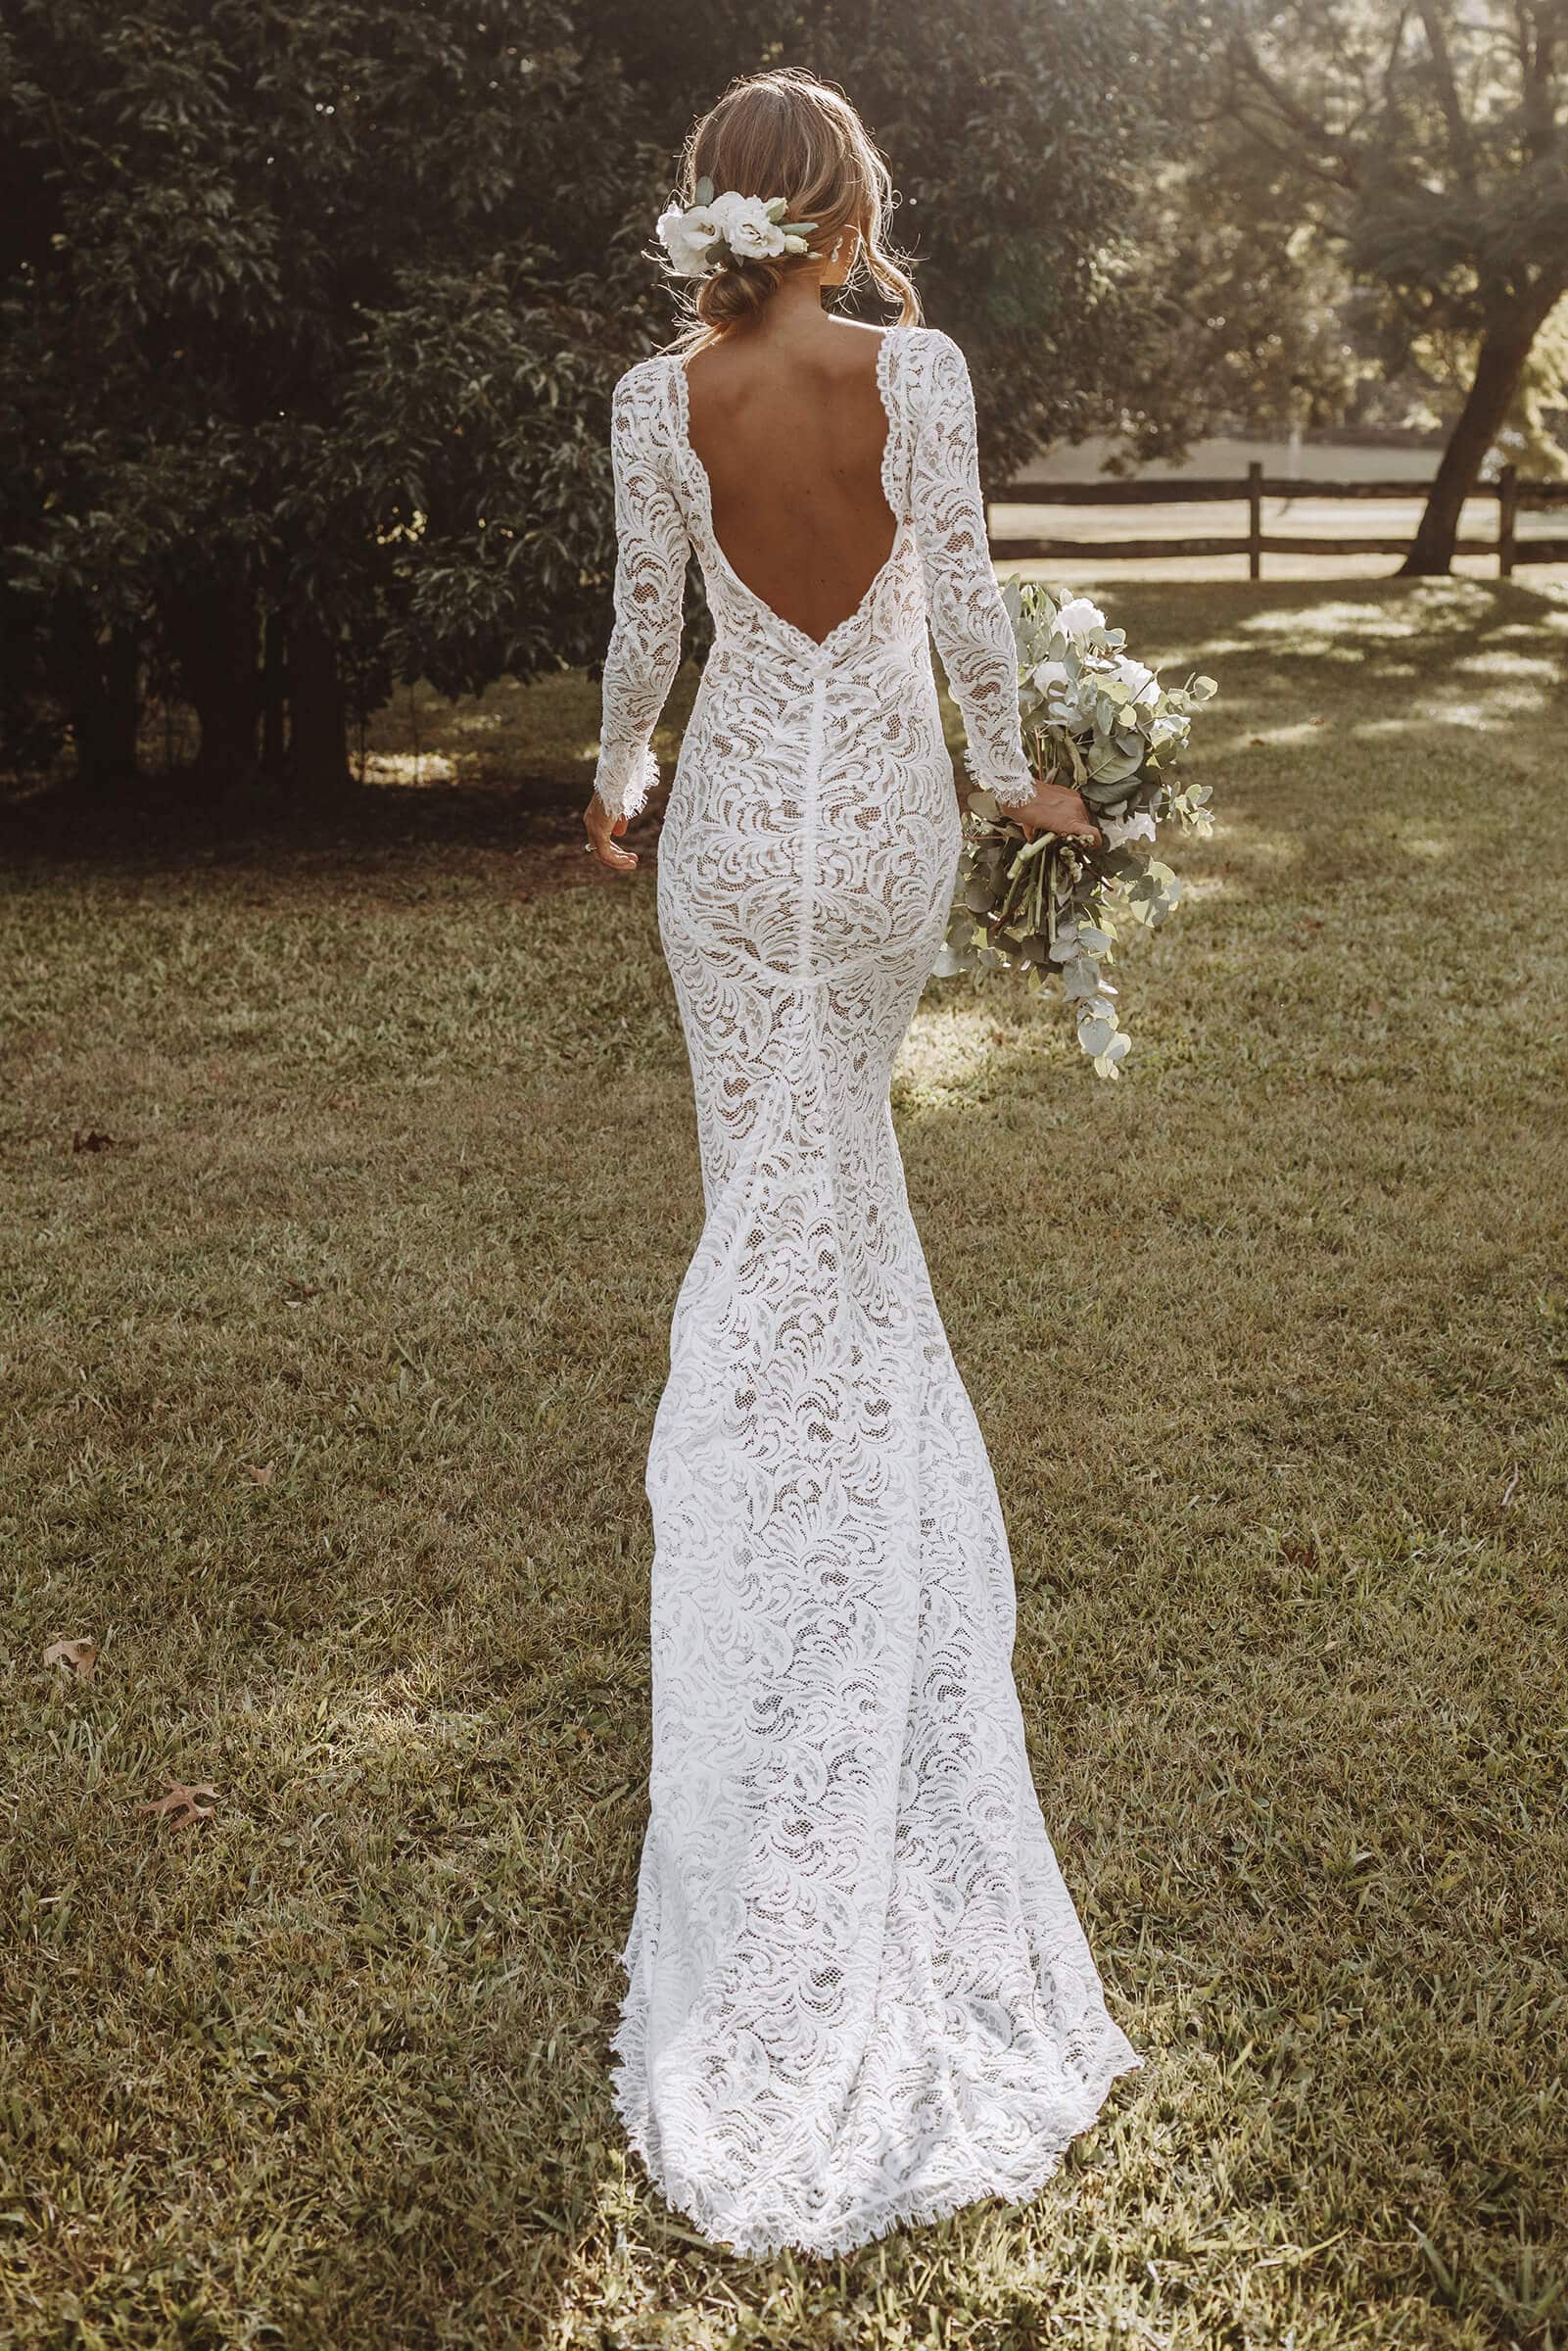 The Most Beautiful Wedding Dresses Brides Wore in 2020